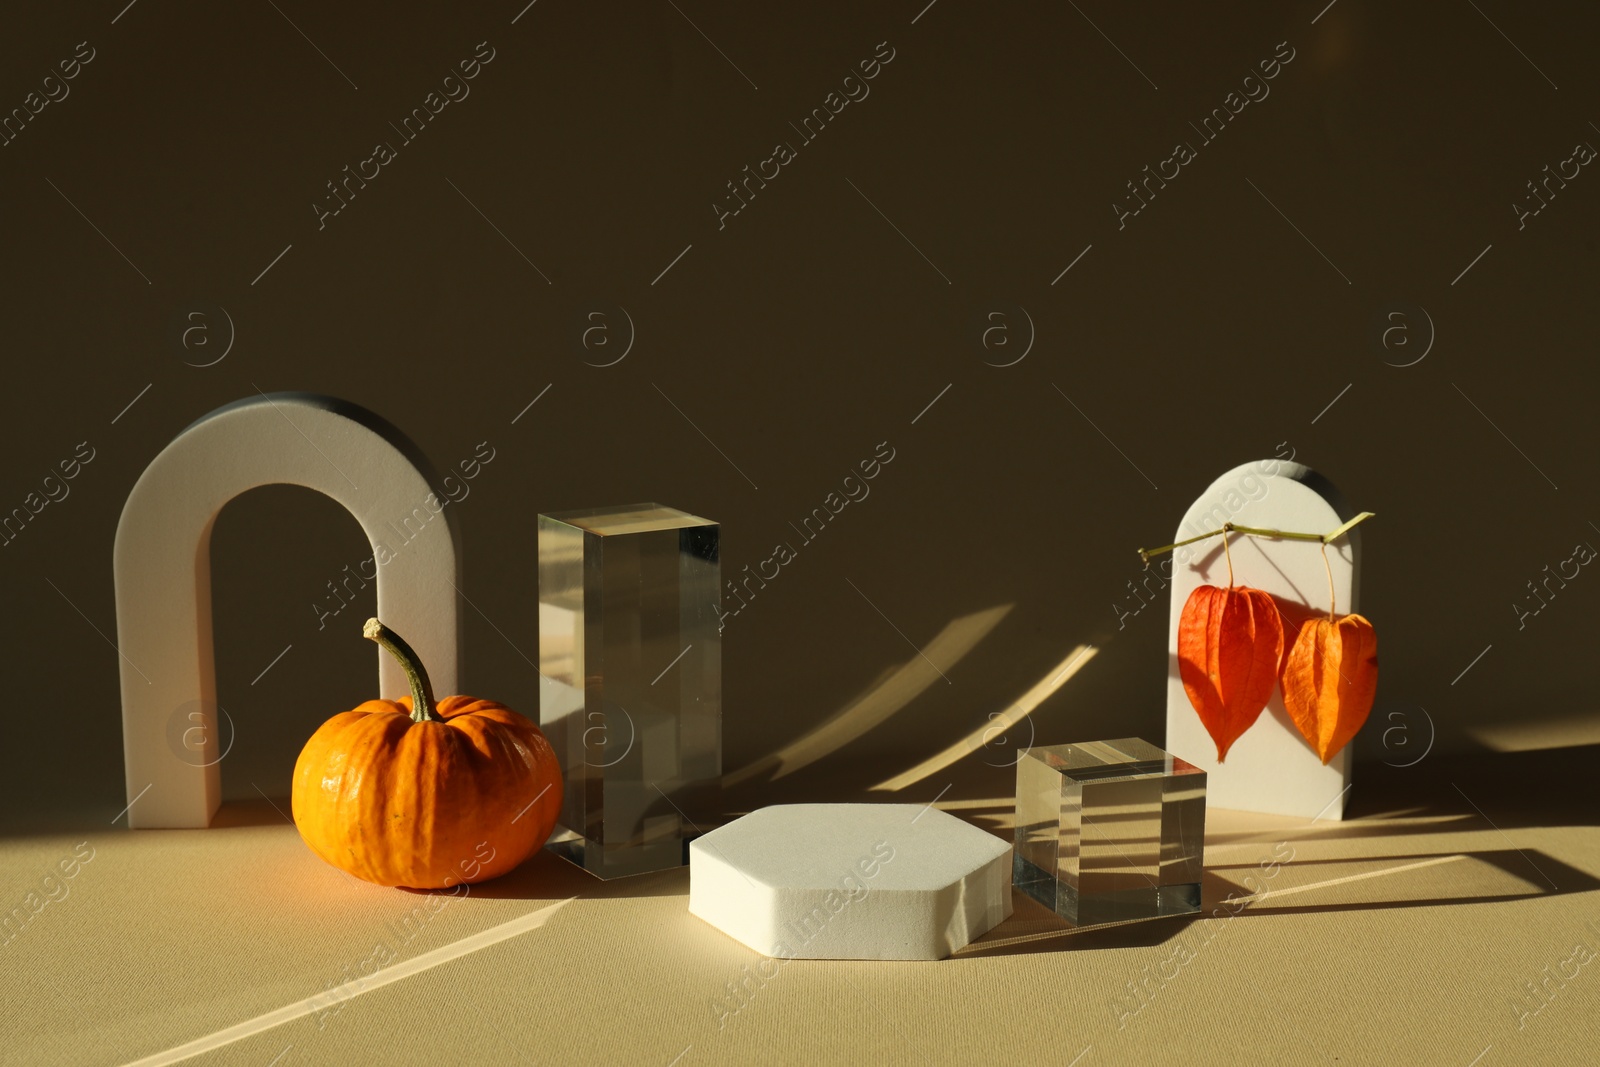 Photo of Stylish presentation for product. Autumn composition with decorative pumpkin and geometric figures on beige background